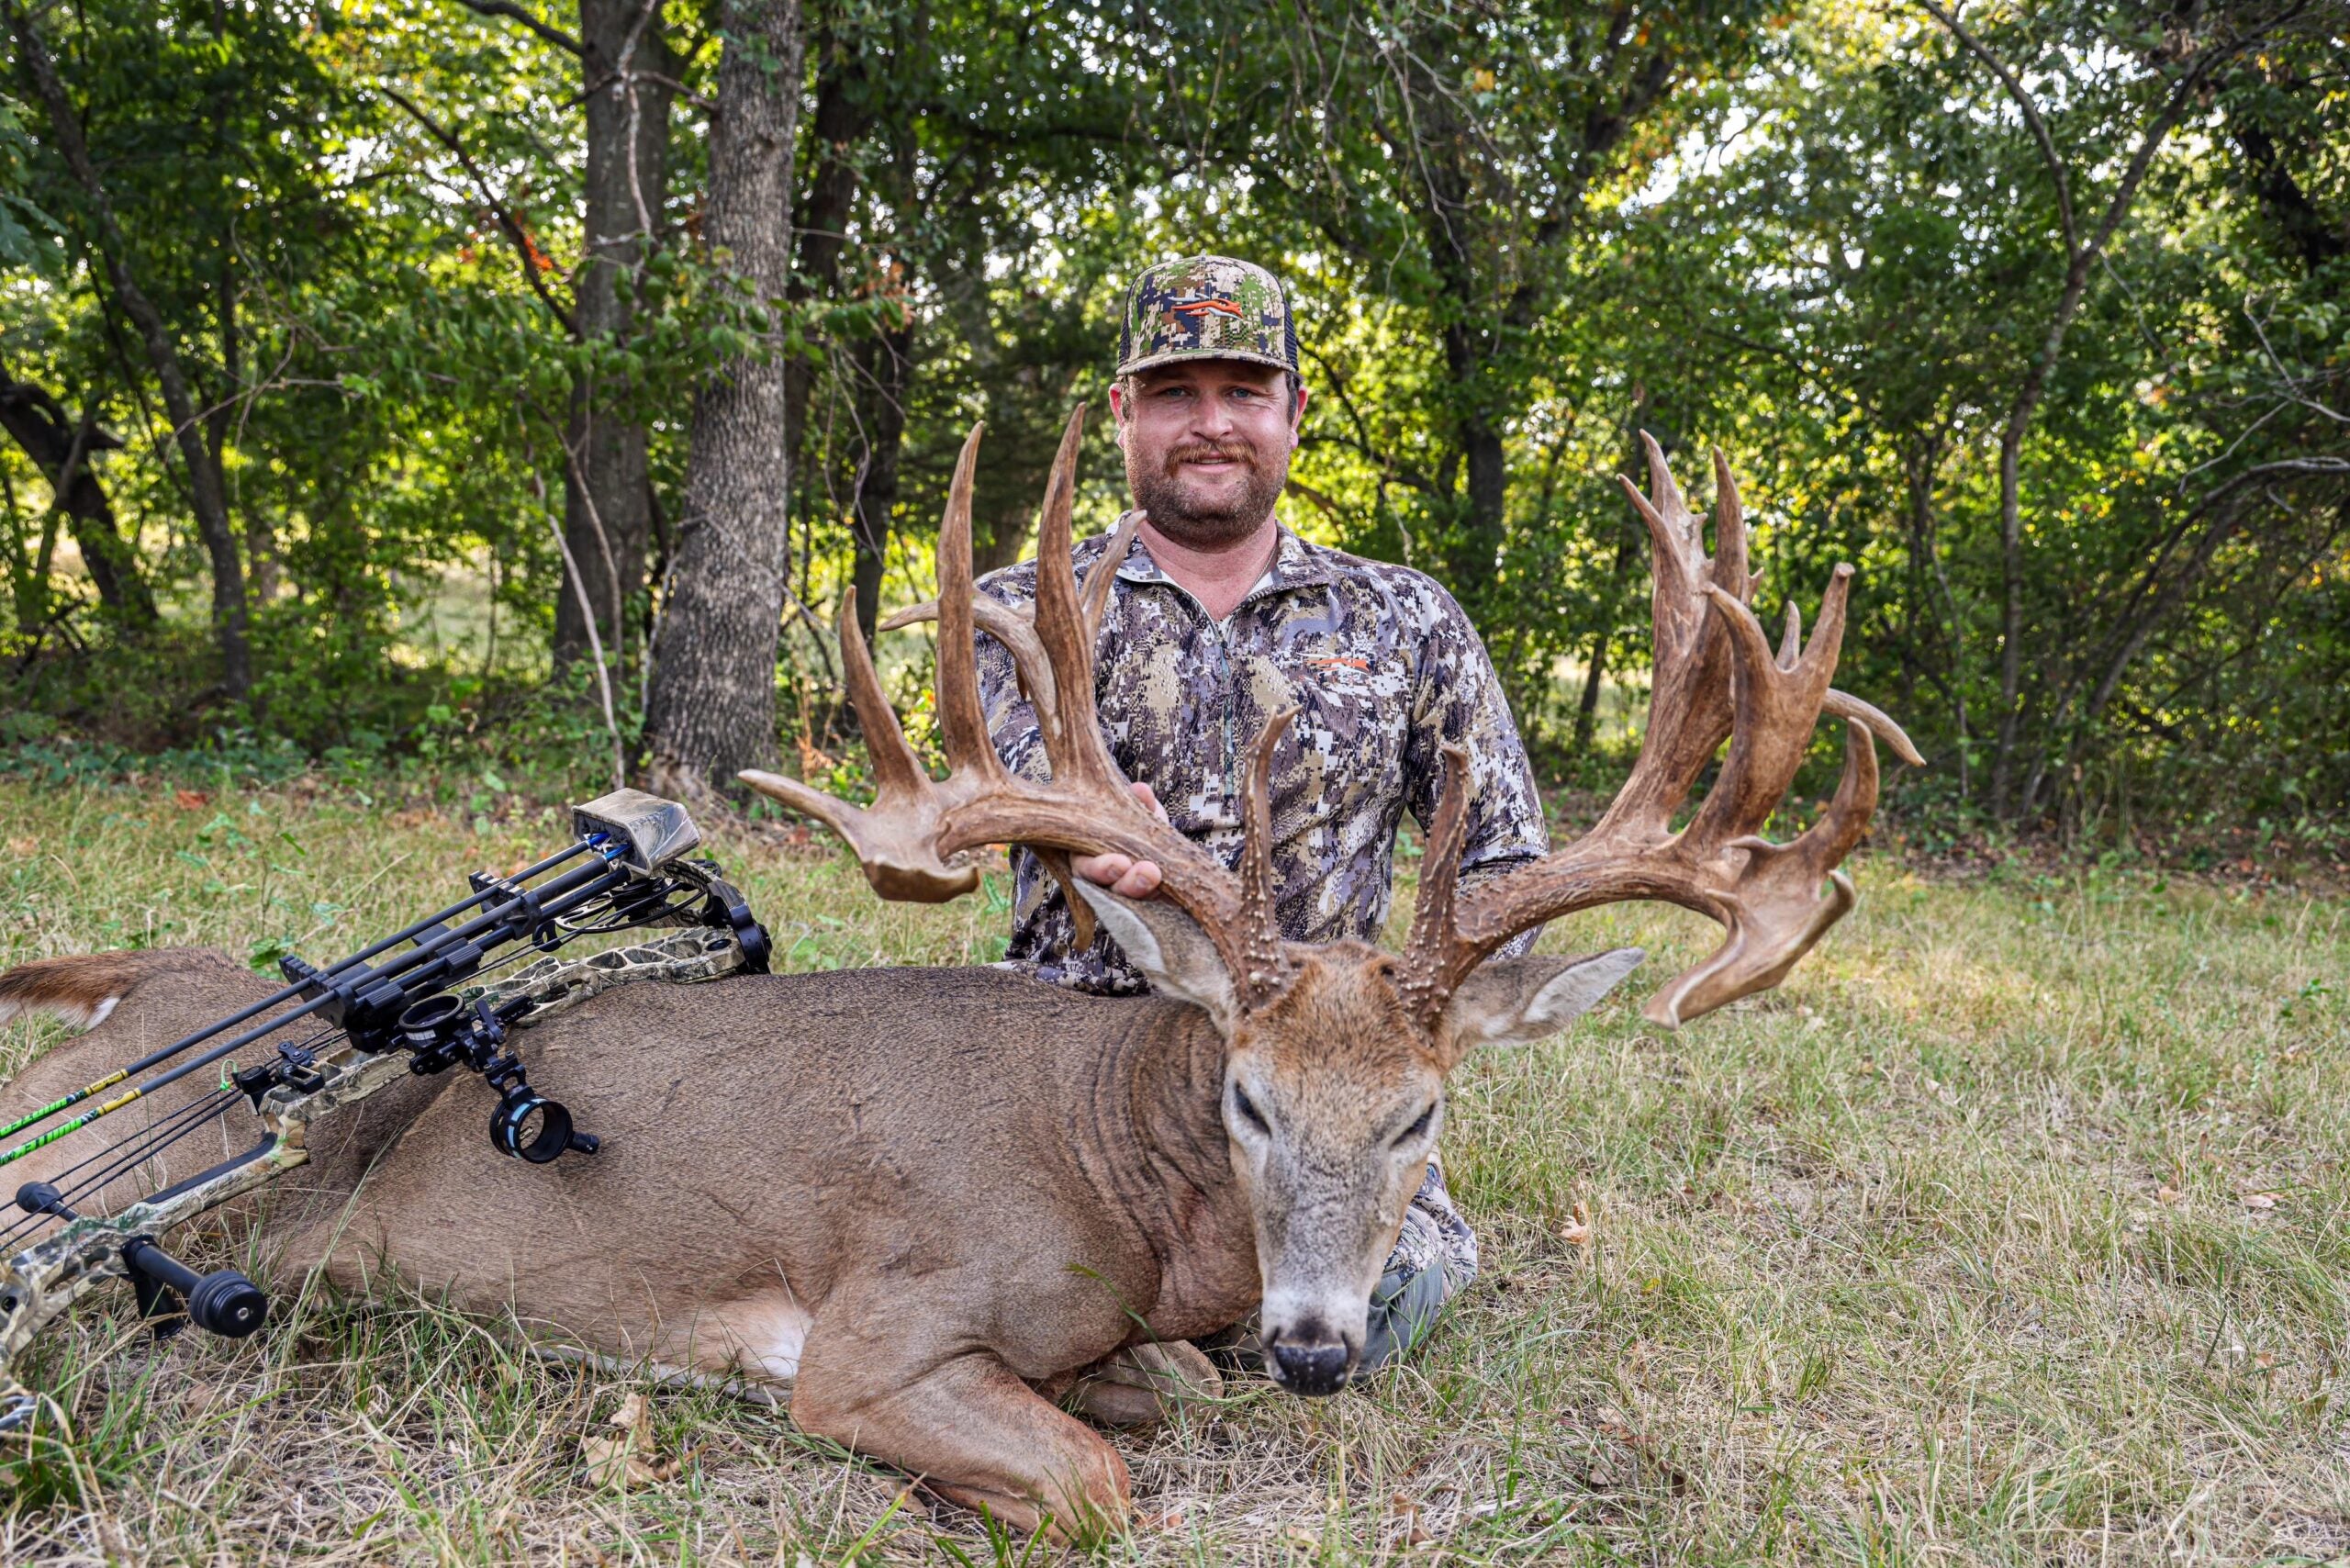 An Oklahoma bowhunter sits on the ground posing with a 200-class Oklahoma nontypical whitetail buck.